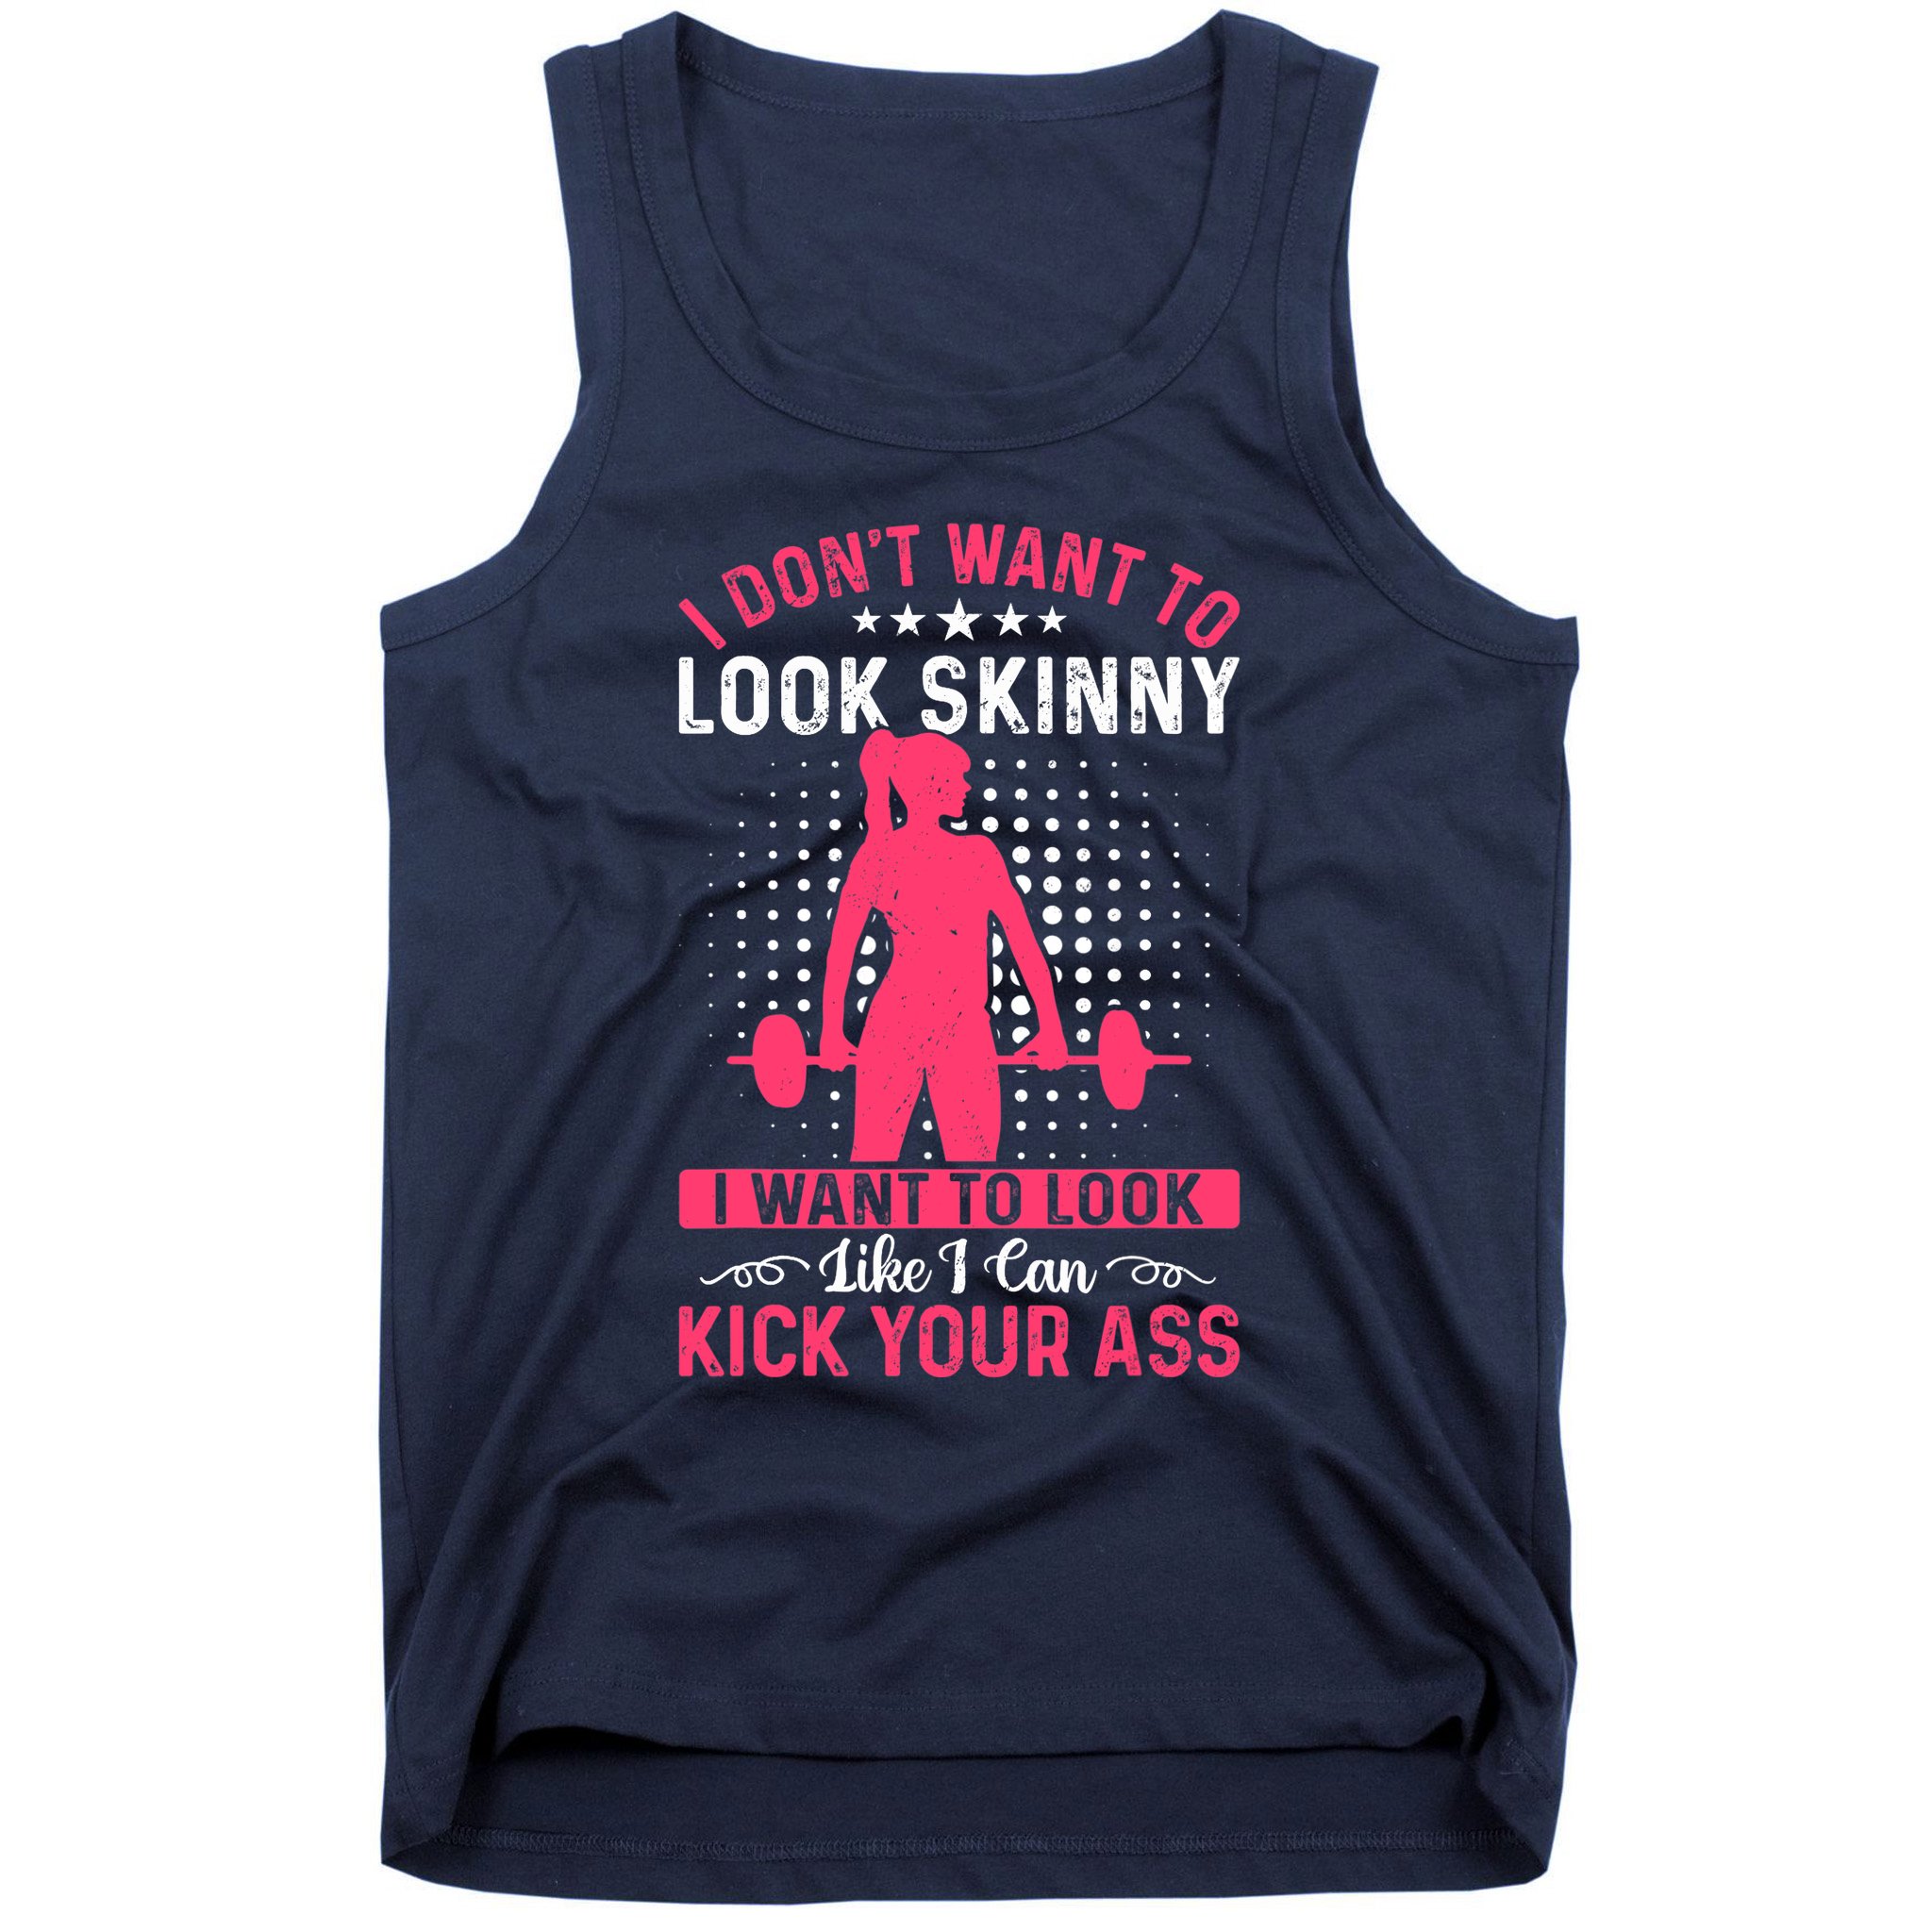 https://images3.teeshirtpalace.com/images/productImages/idw8626358-i-dont-want-to-look-skinny-funny-workout-kick-your-gym-ass--navy-tk-garment.jpg